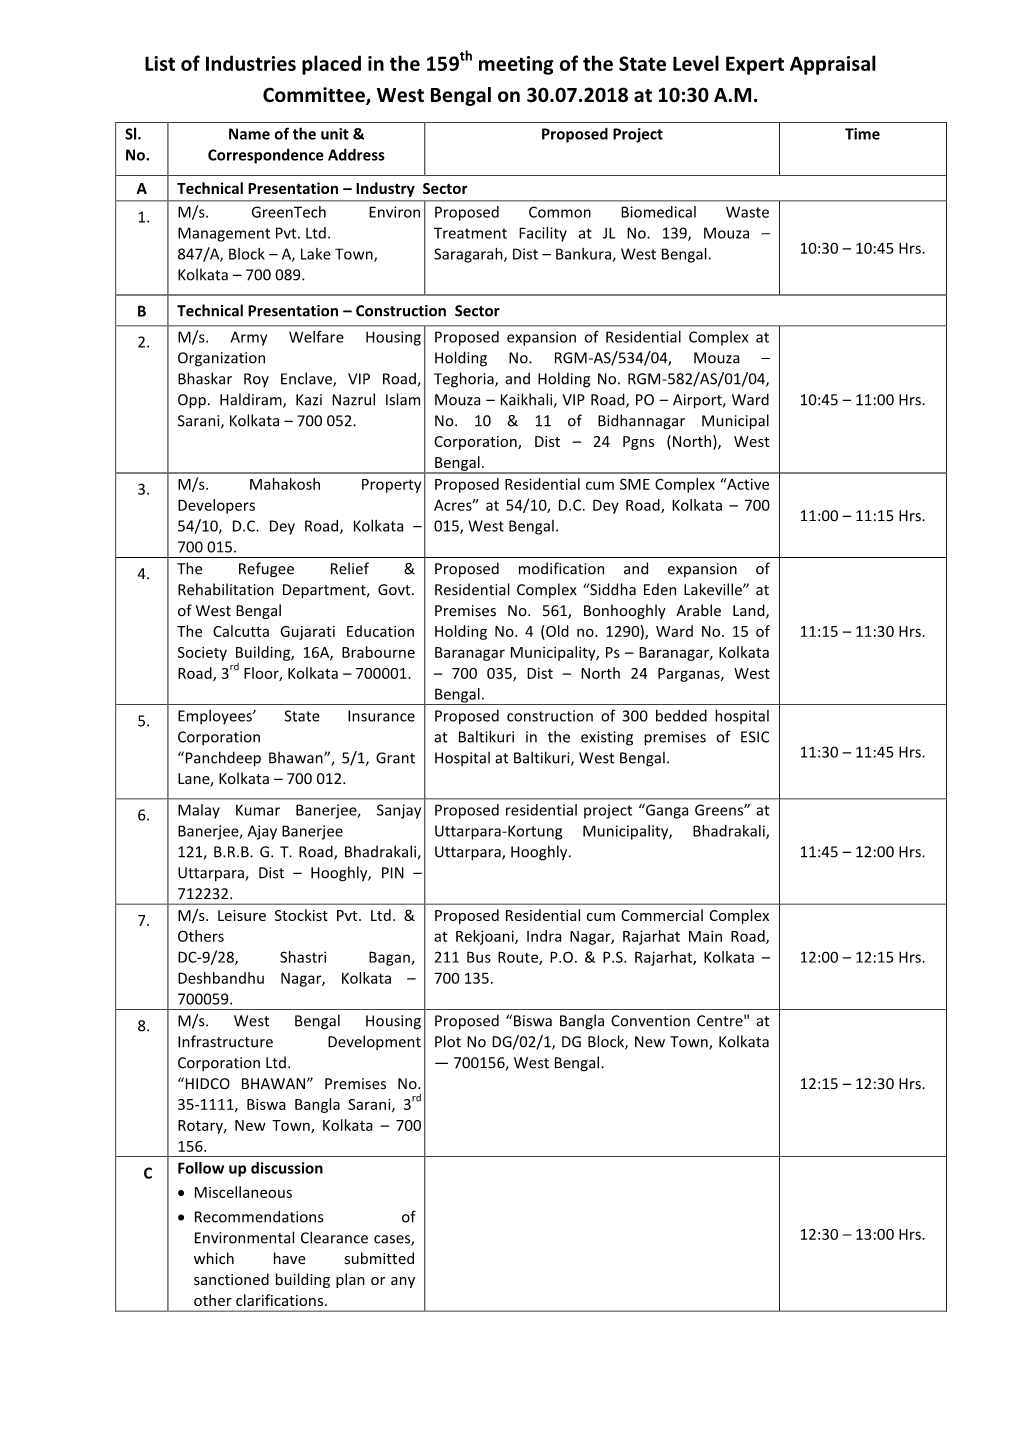 List of Industries Placed in the 159 Meeting of the State Level Expert